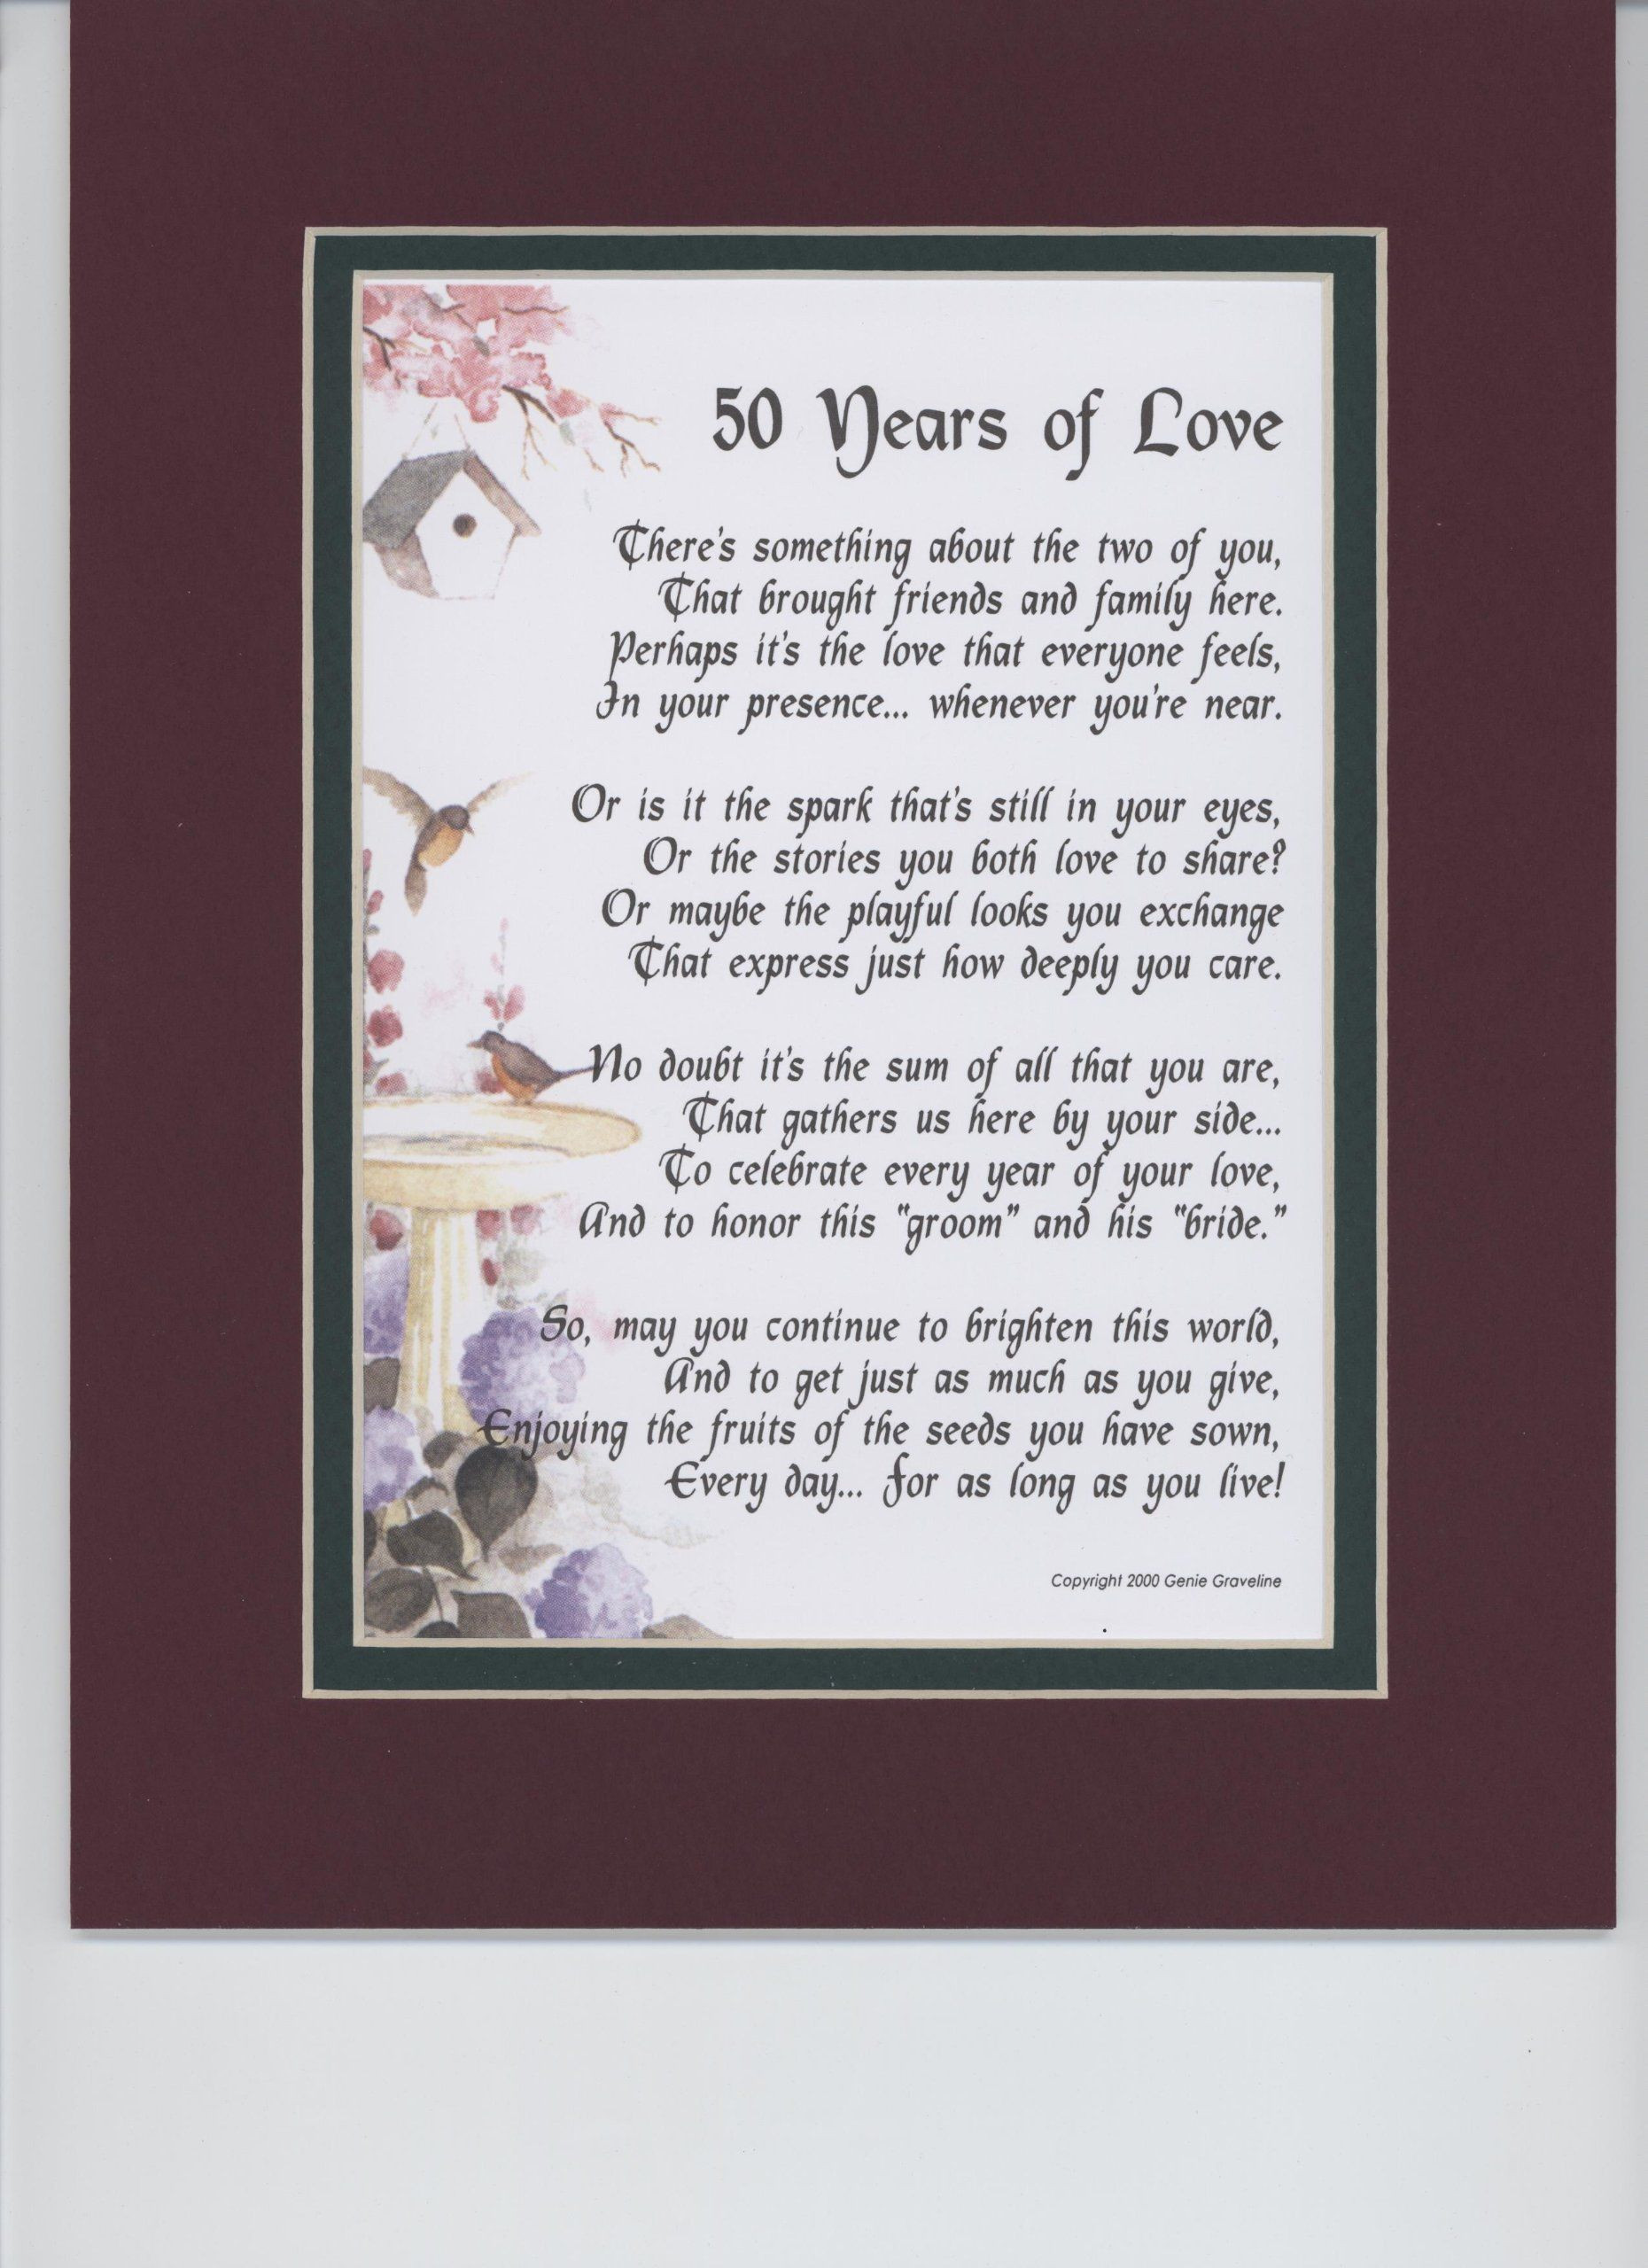 50Th Wedding Anniversary Gift Ideas For Aunt And Uncle
 "50 Years of Love" Touching 8x10 Poem A Gift For A 50th